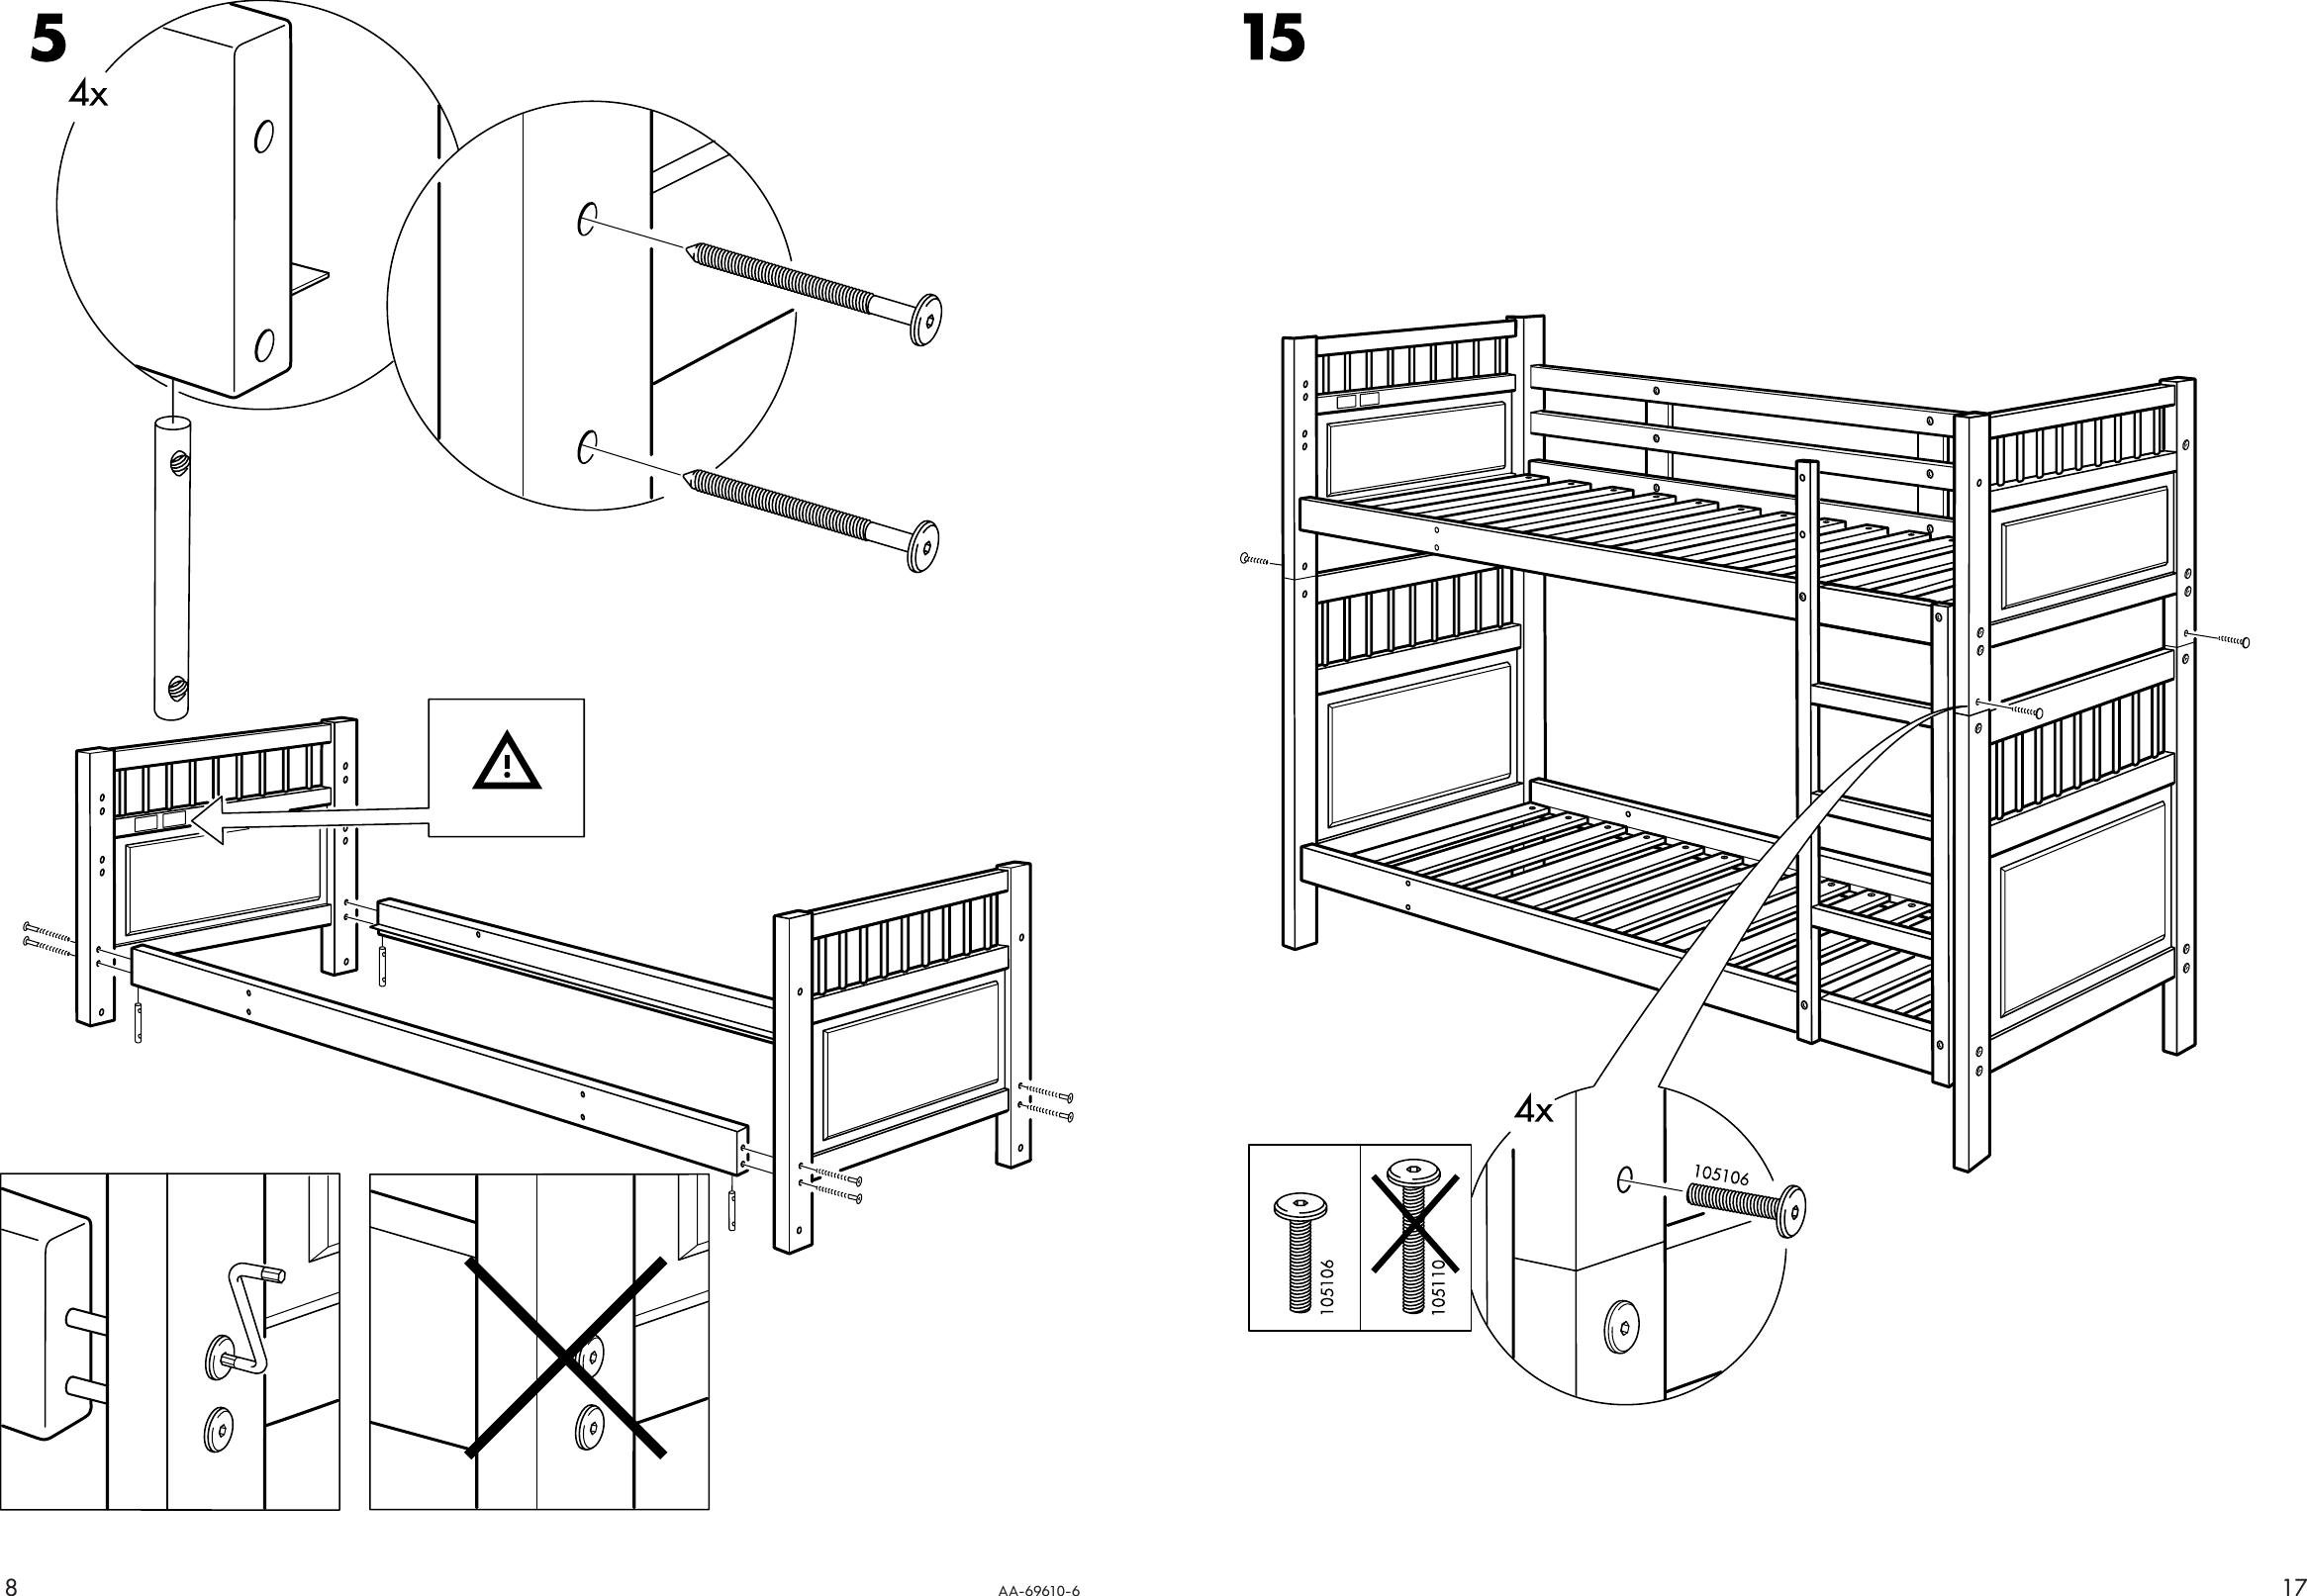 Ikea Hemnes Bunk Bedframe Twin Assembly, Ikea Bunk Bed Assembly Directions